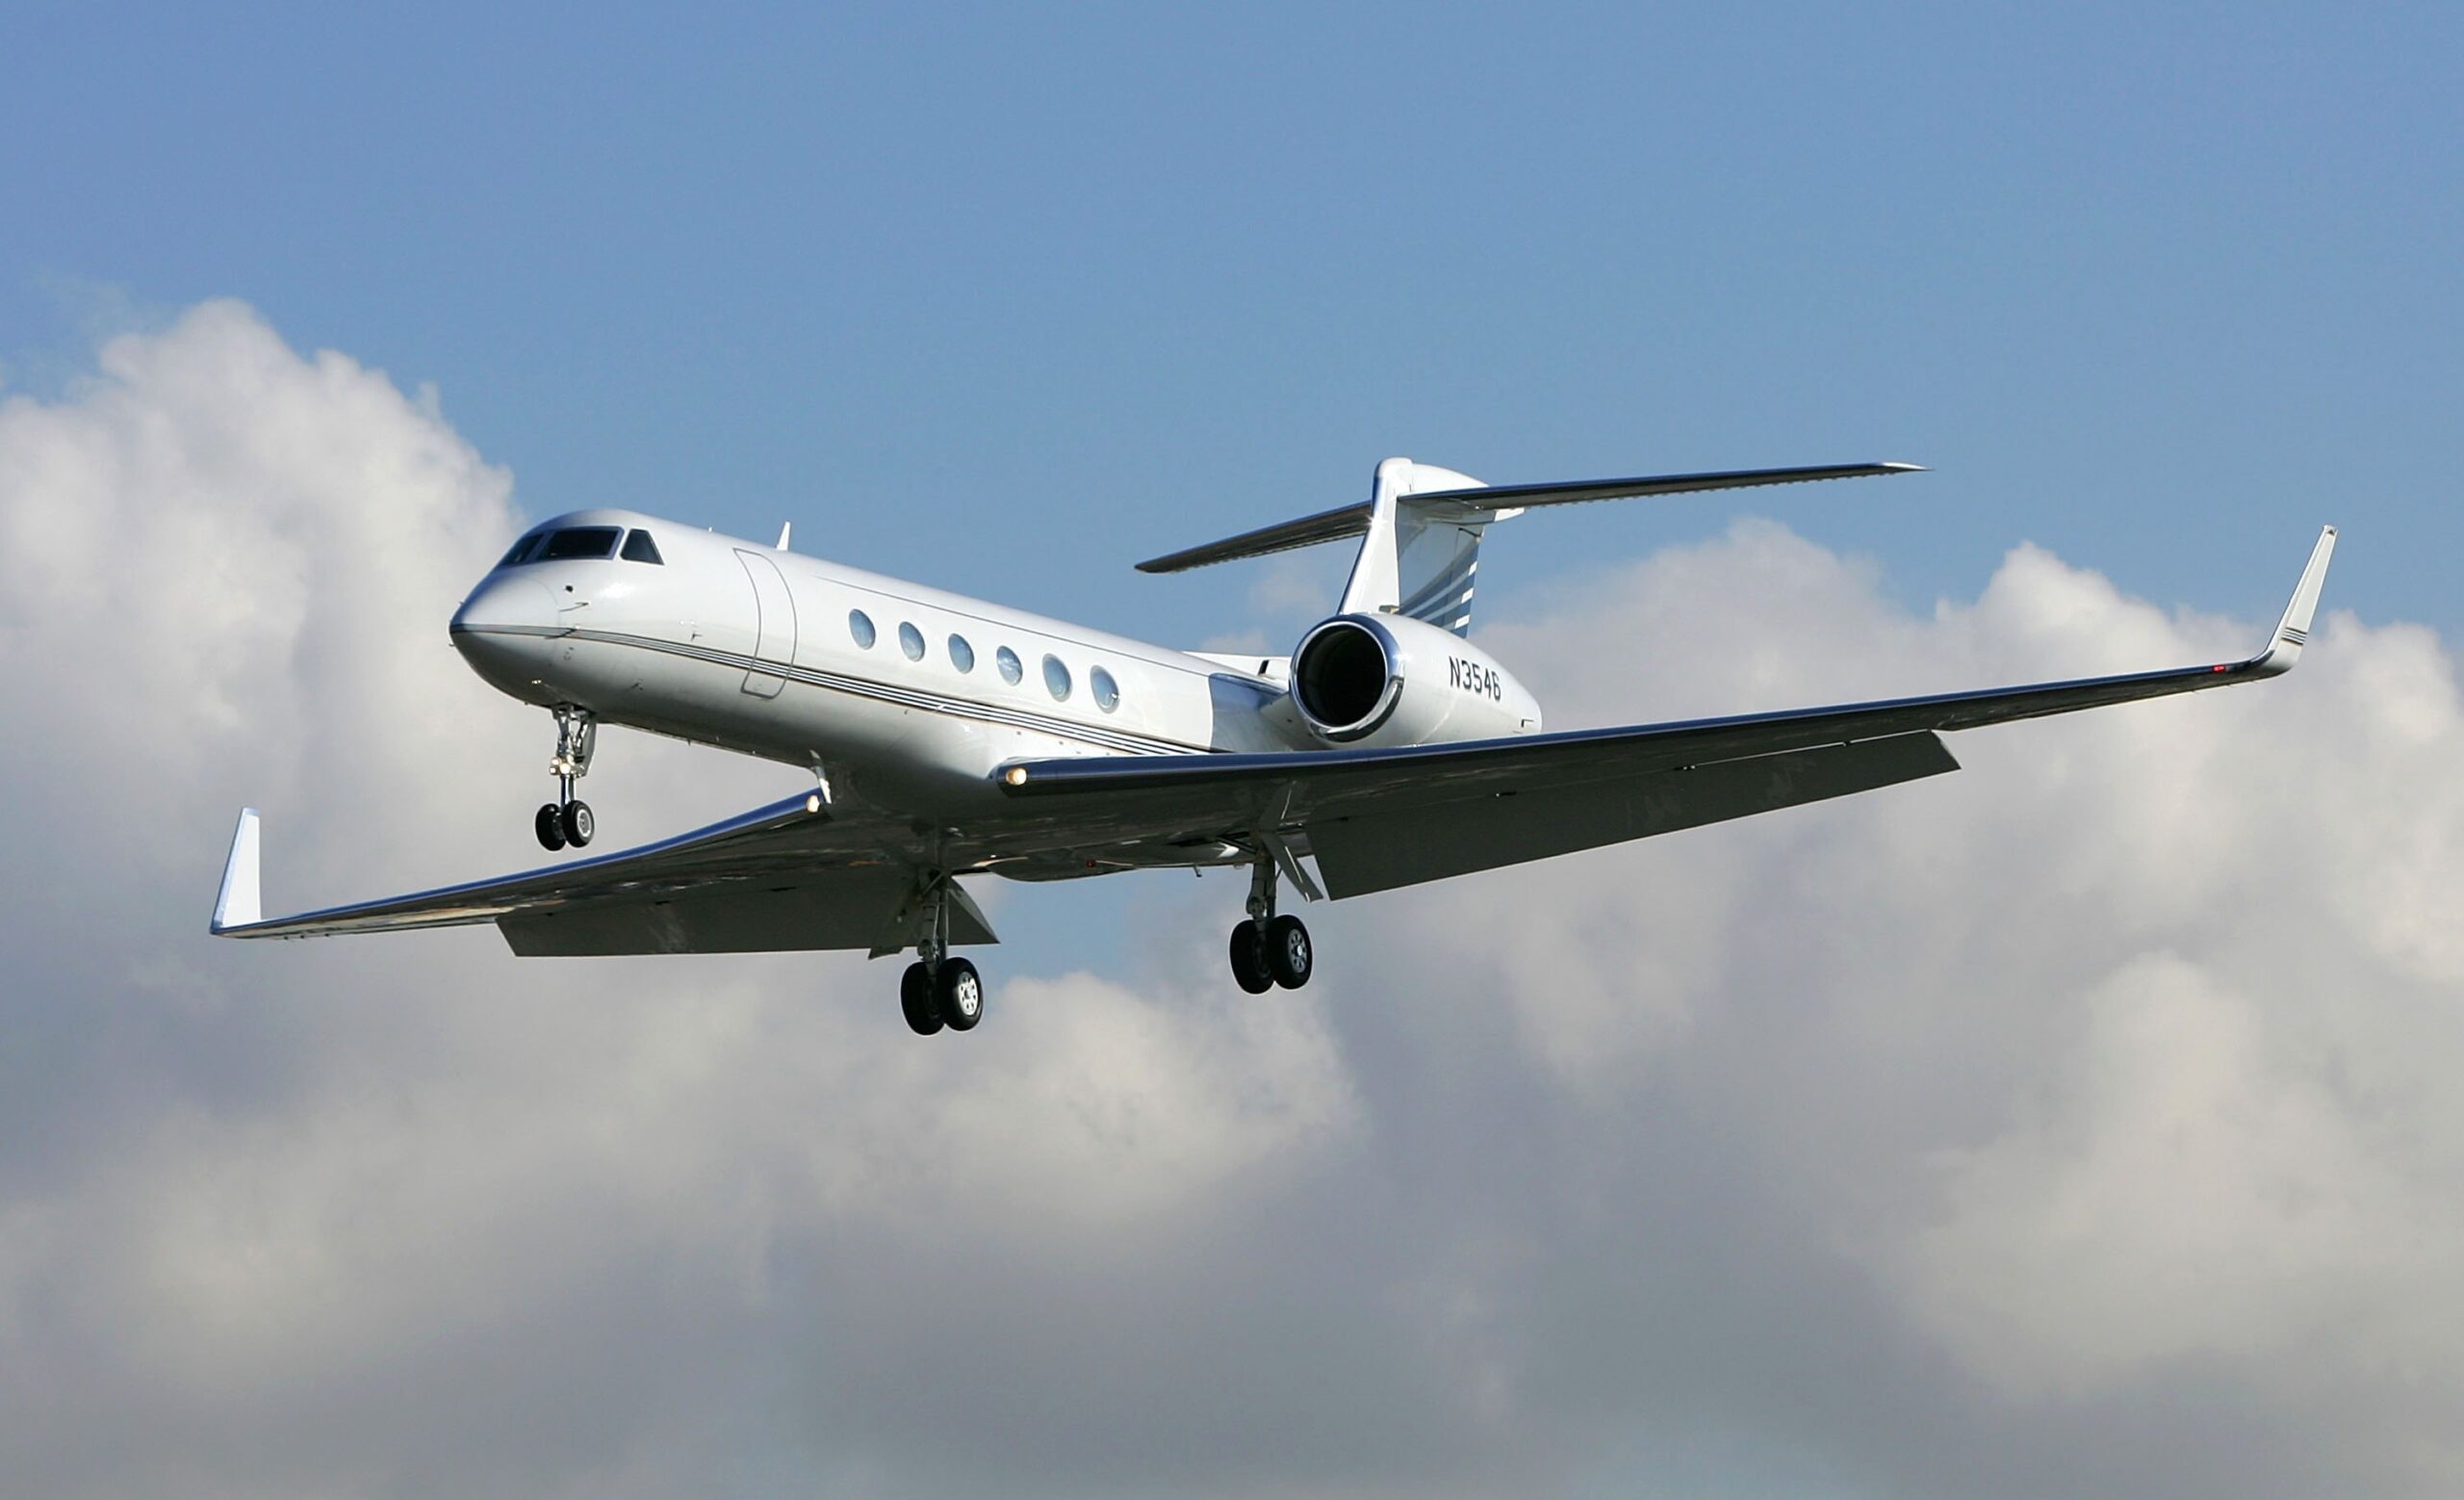 Tiger Woods Private Airlines Gulfstream G550 (Source The Sun)